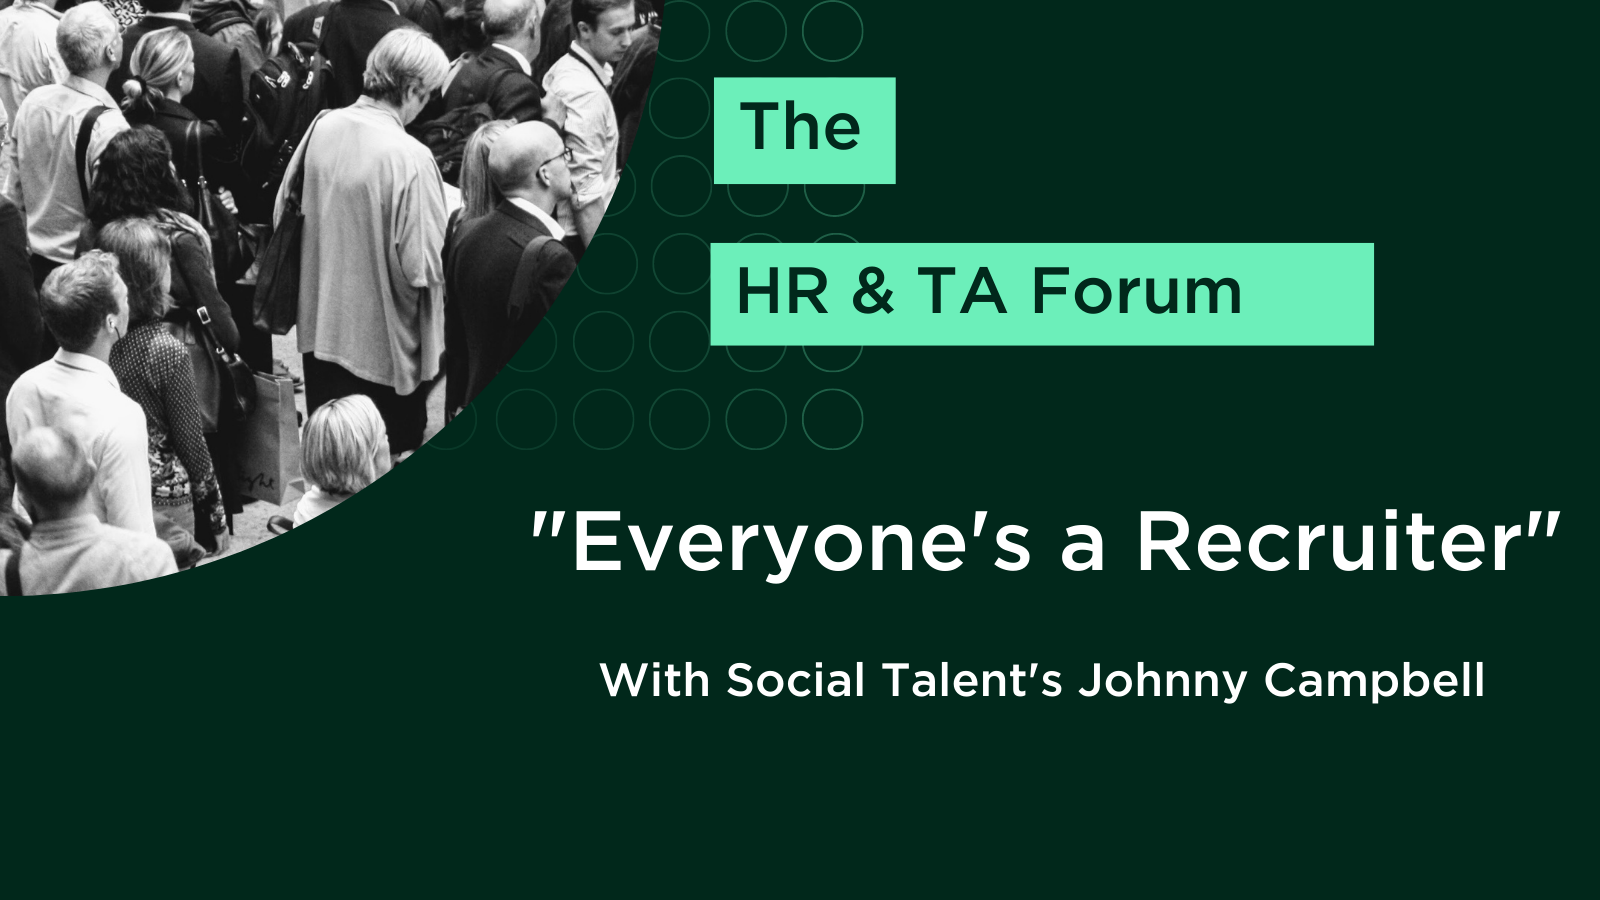 “Everyone’s a Recruiter”. Takeaways From The Latest HR & TA Leaders Forum